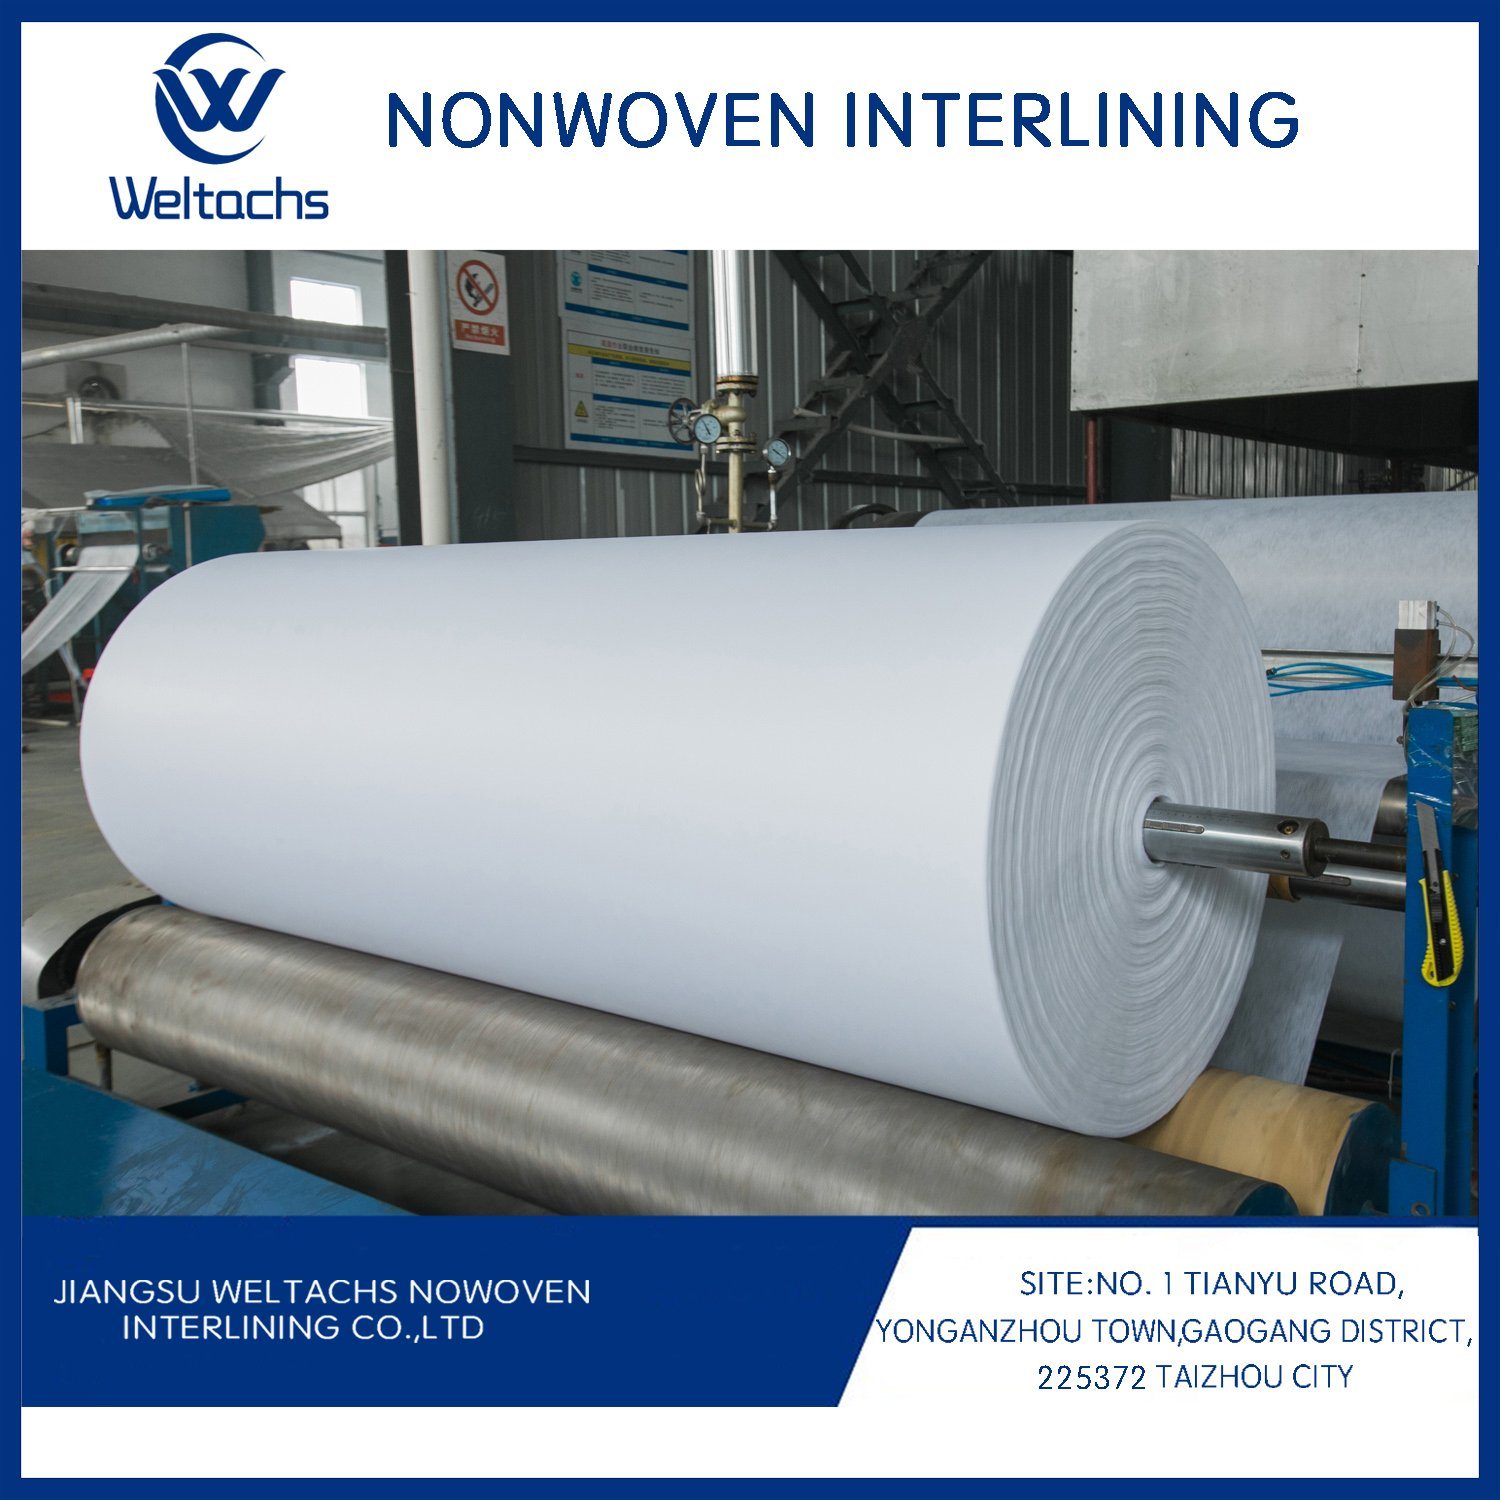 23 GSM All Types Selling Non Woven Fusing Interlining Fabric Nonwoven Interlining Fabric Fusing Interlining